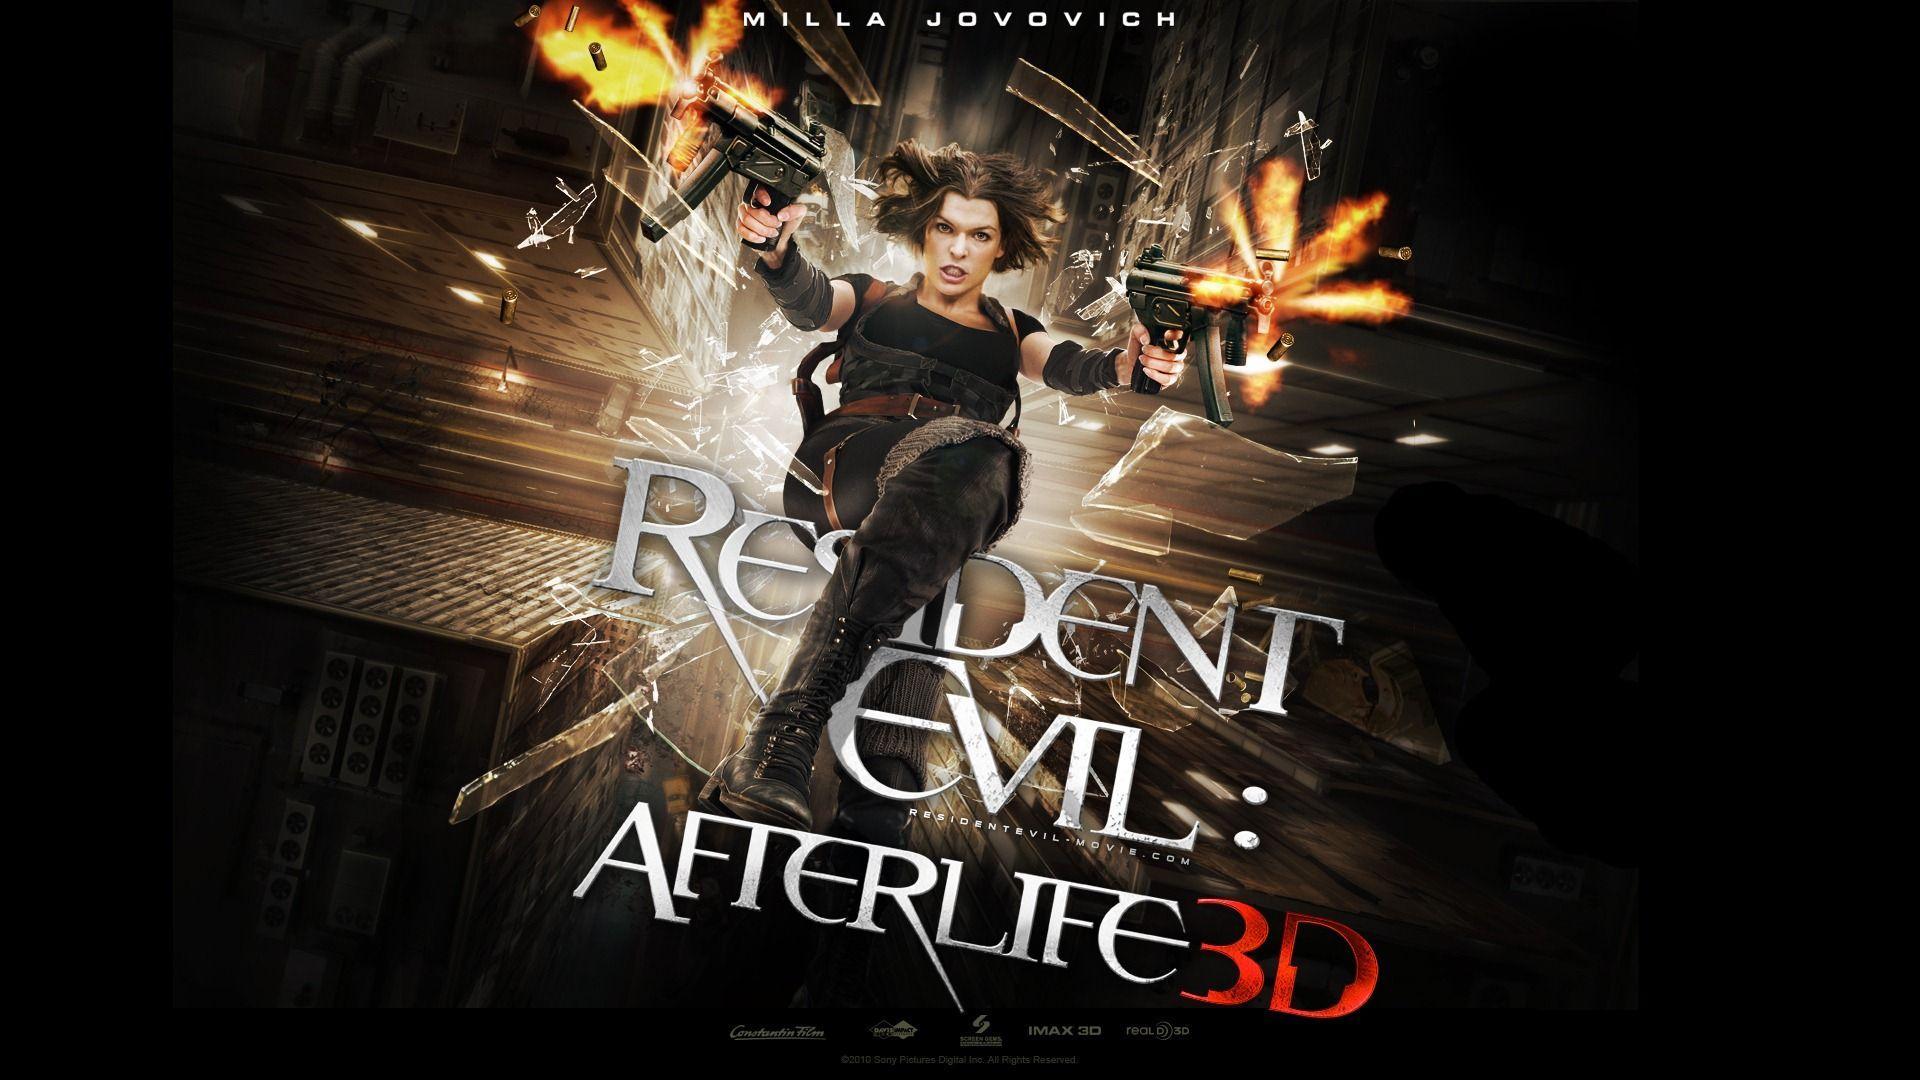 Movie Resident Evil: Afterlife Wallpaper 1280x1024 px Free